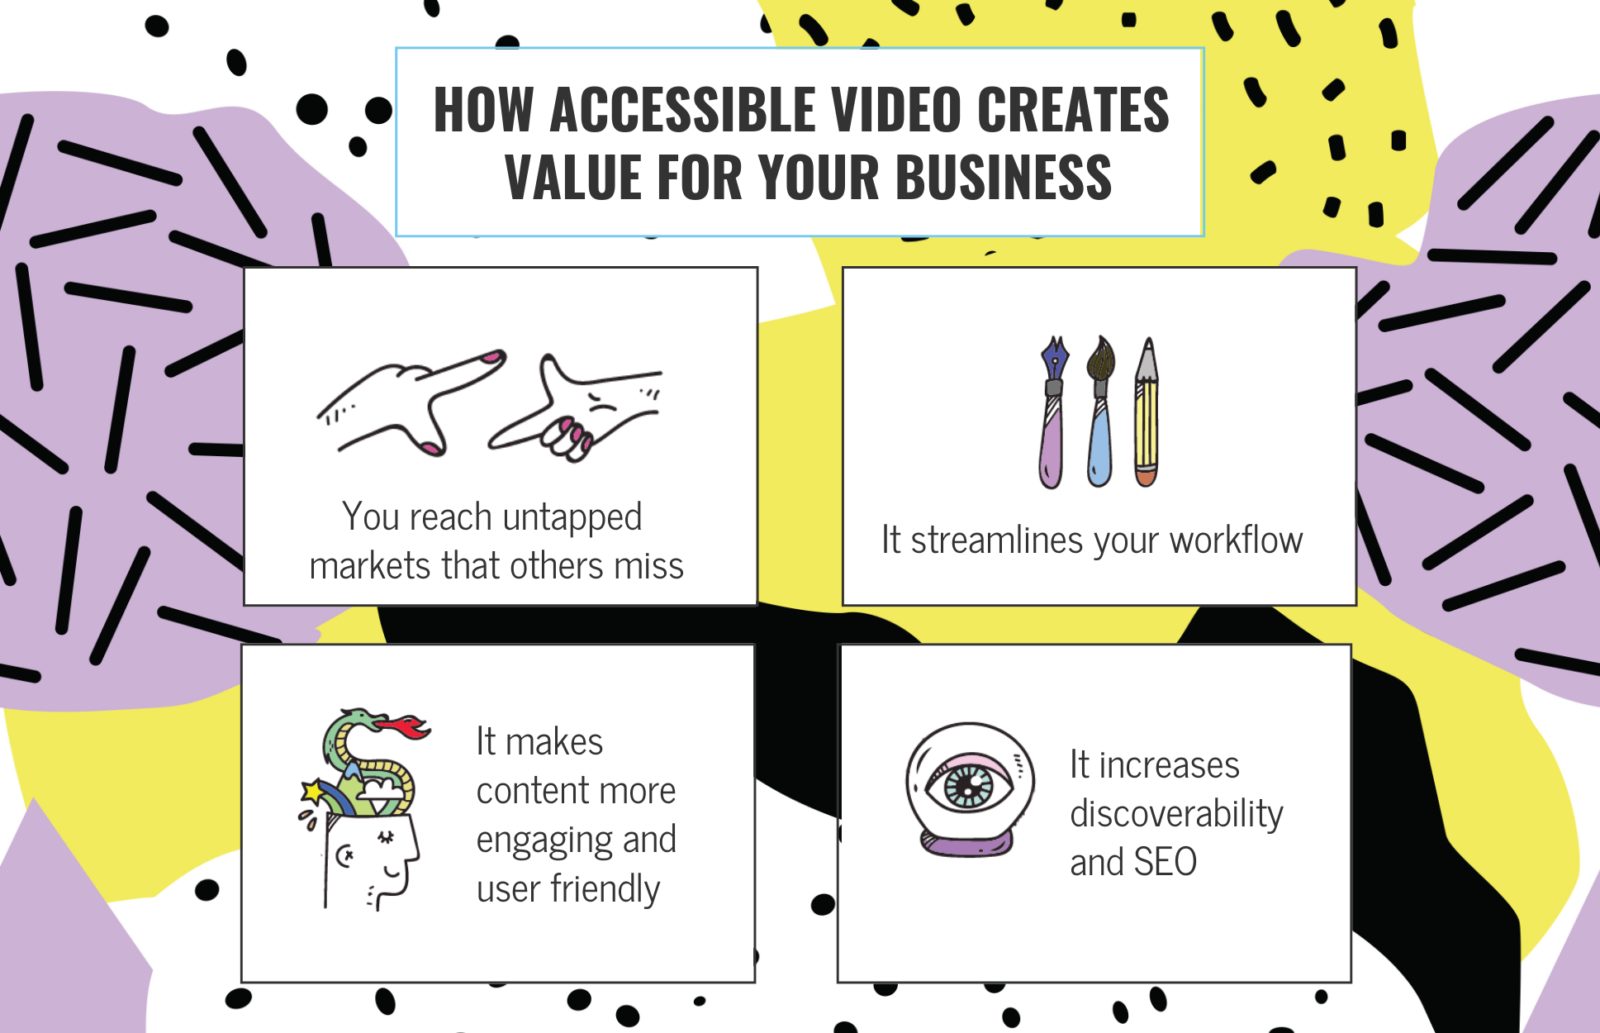 How accessible video create value for your business You reach untapped markets that others miss It makes content more engaging and user friendly It streamlines your workflow It increases discoverability and SEO